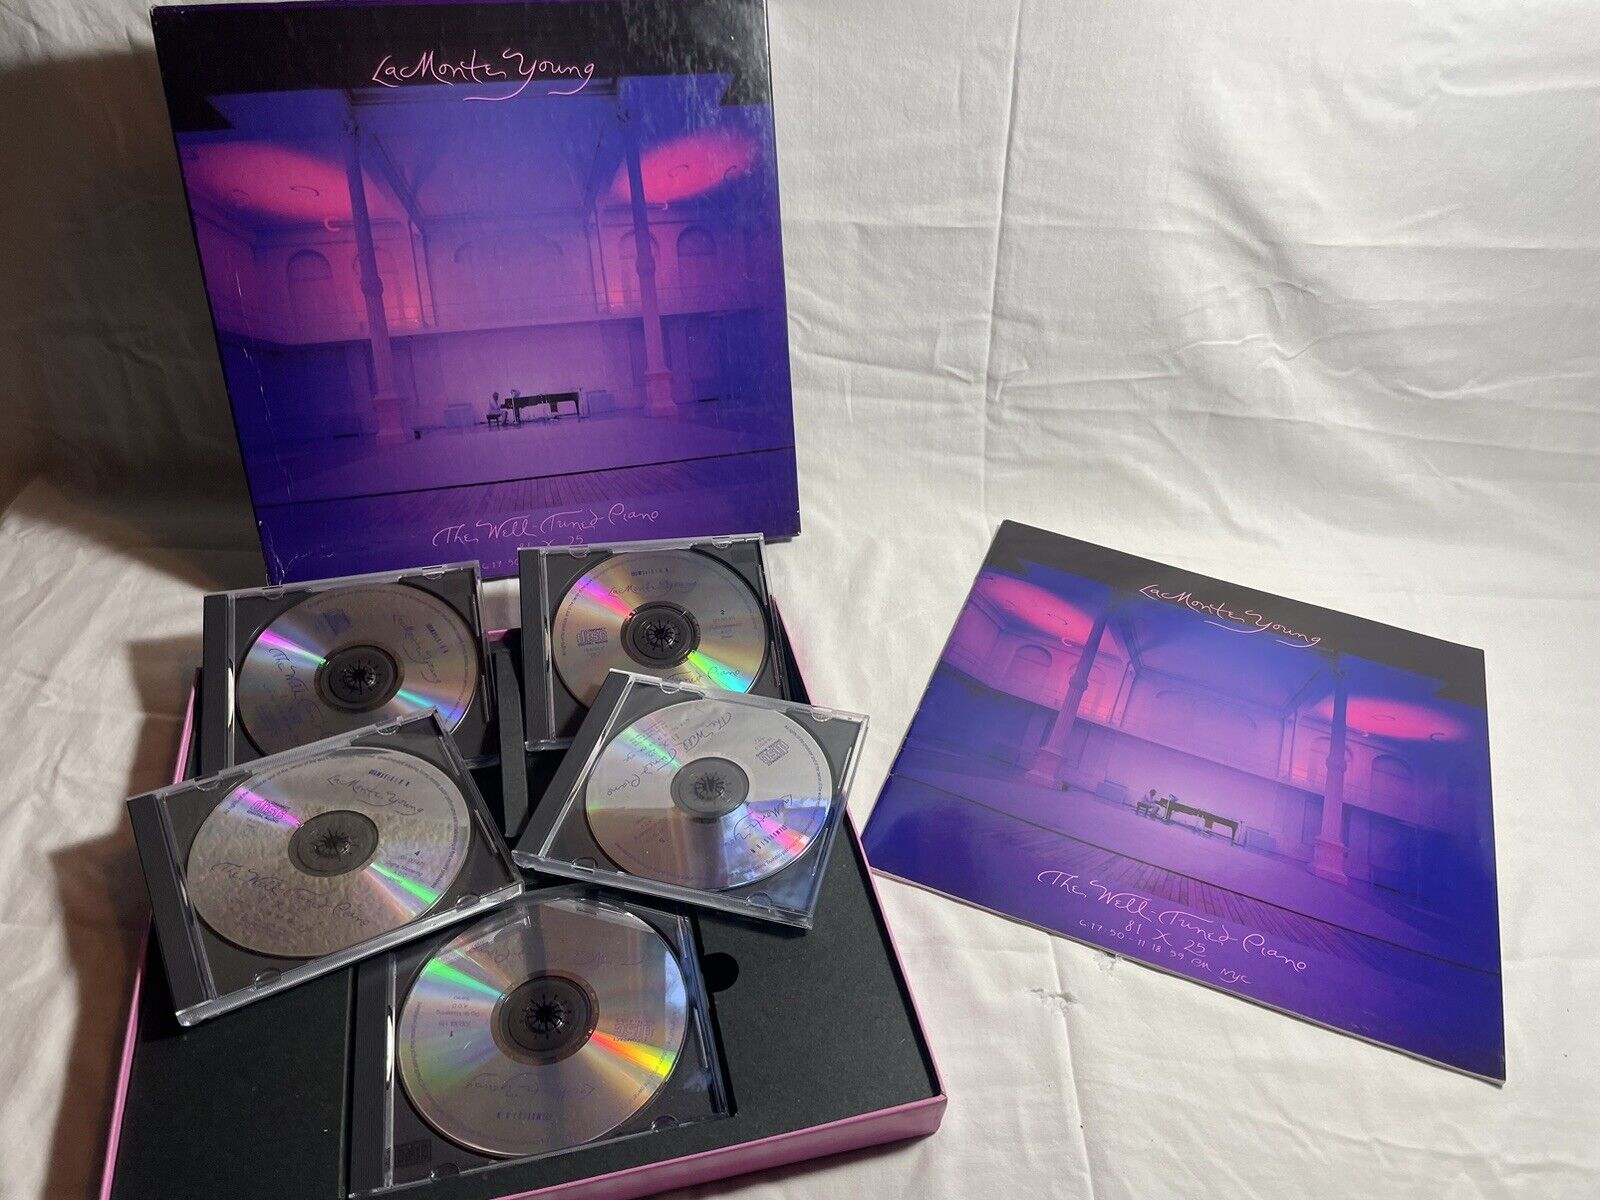 La Monte Young - Vintage “The Well Tuned Piano “ - 5 CD Boxed Set 